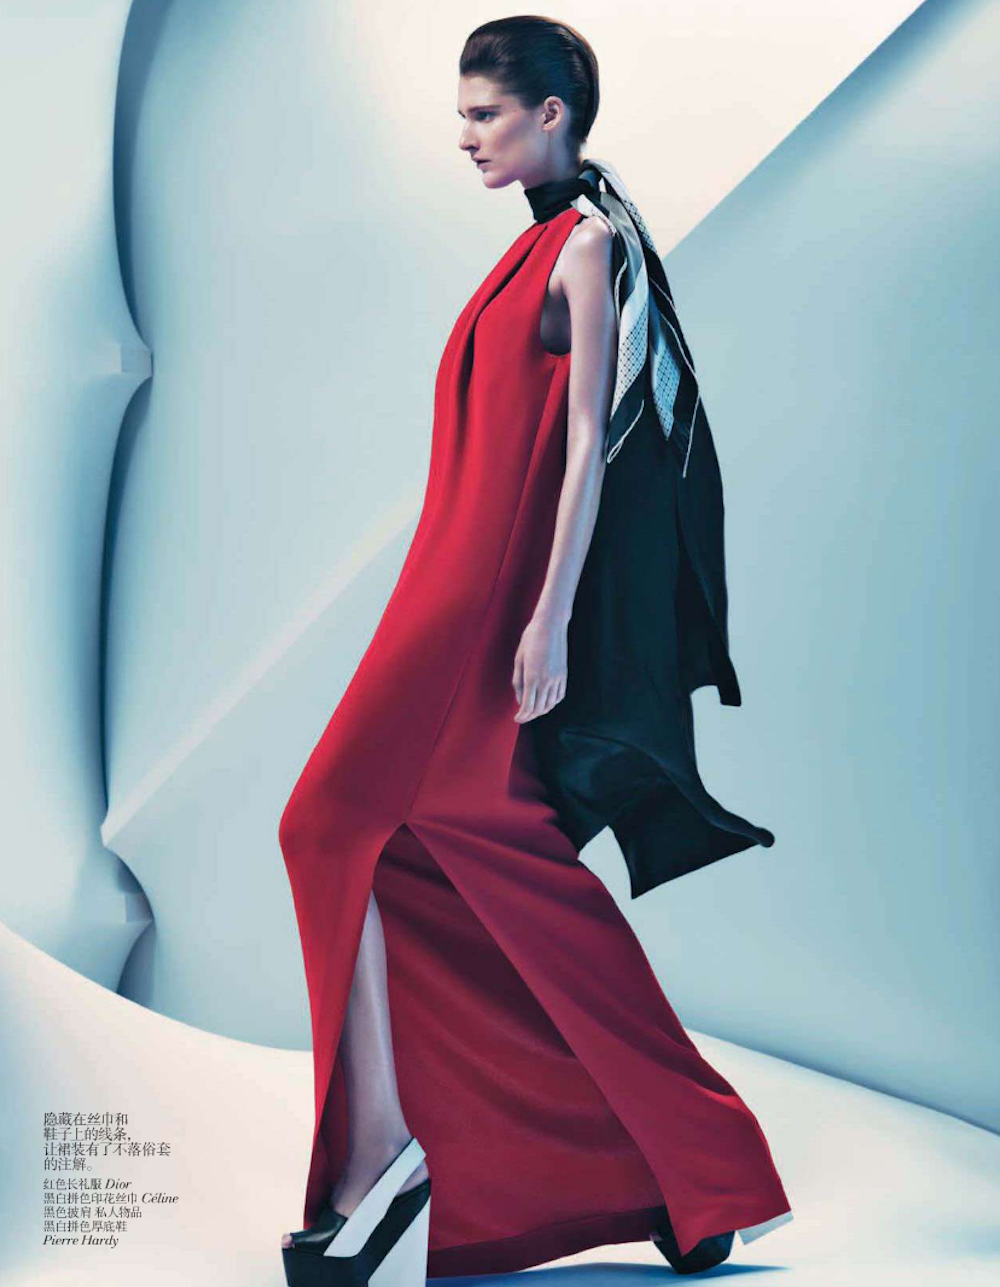 strong statement: marie piovesan by sebastian kim for vogue china ...